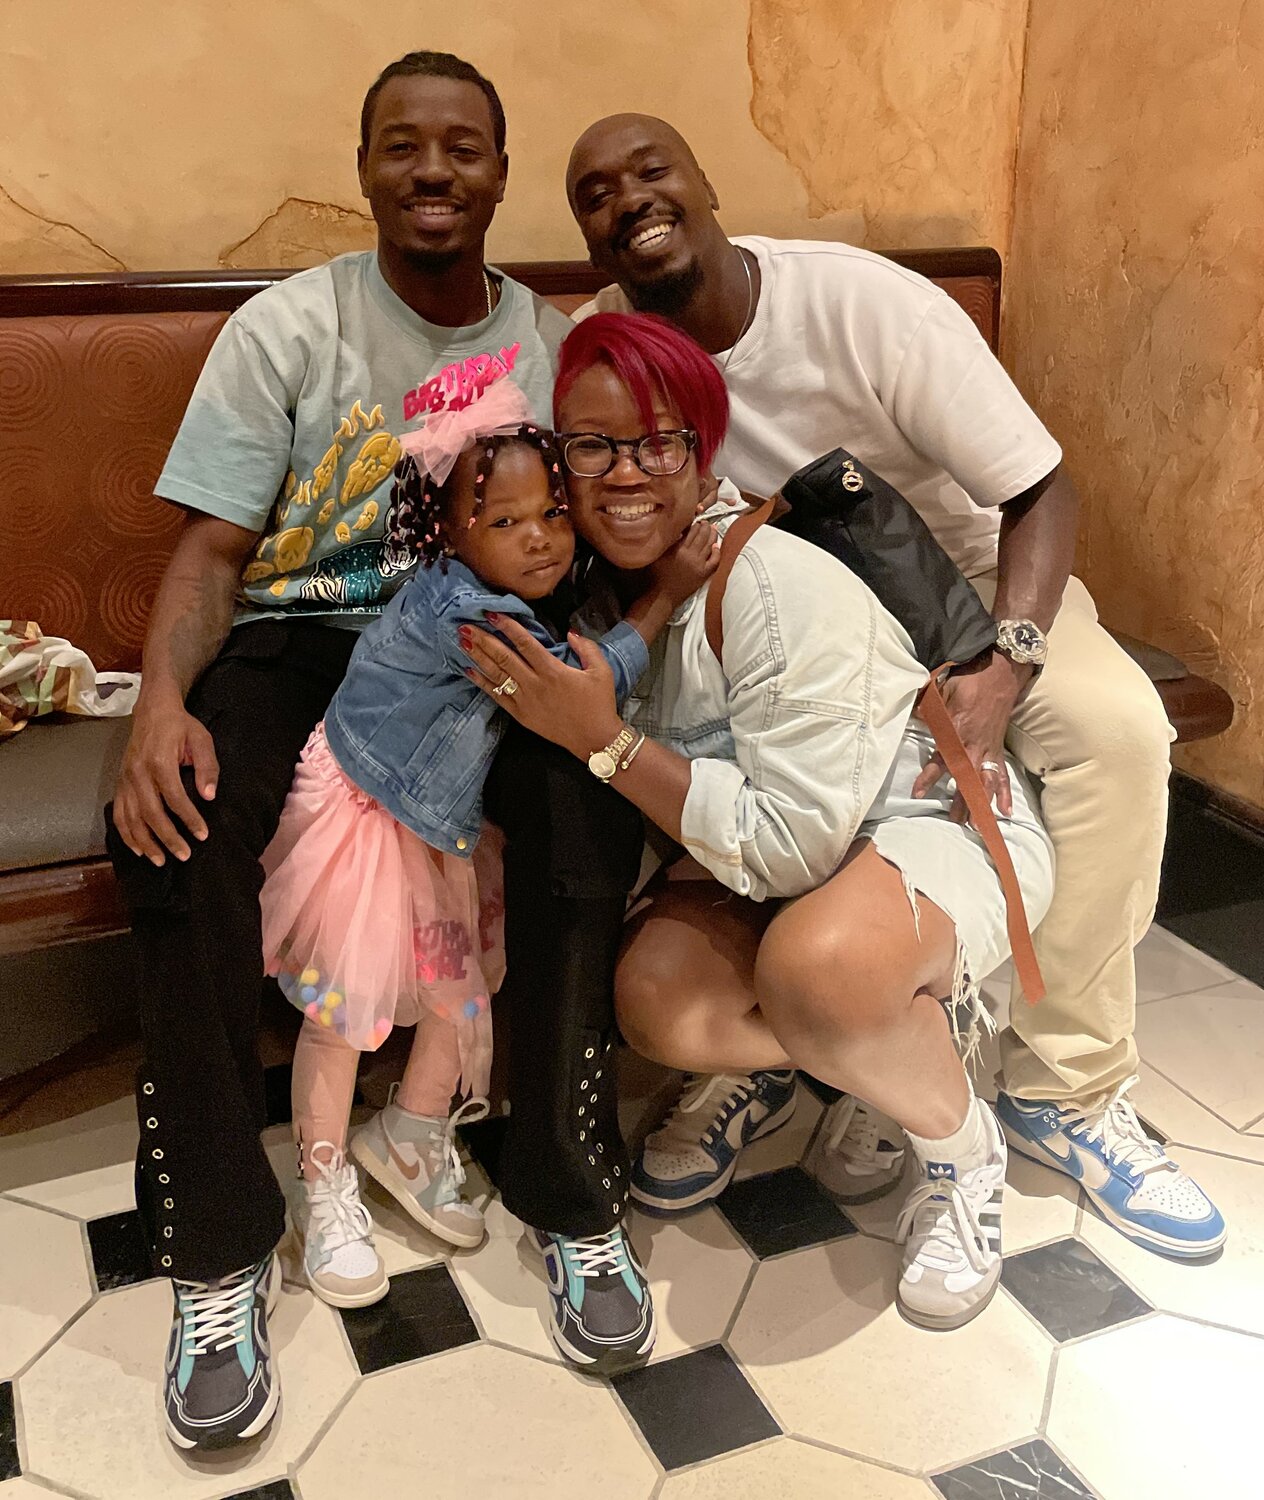 Frankel Mathurin, 41, was inspired to start Frankie’s Elite Transport, his towing firm, by his family: wife Shaquanna James, daughter Callie Grace, and son Frankel Jr.